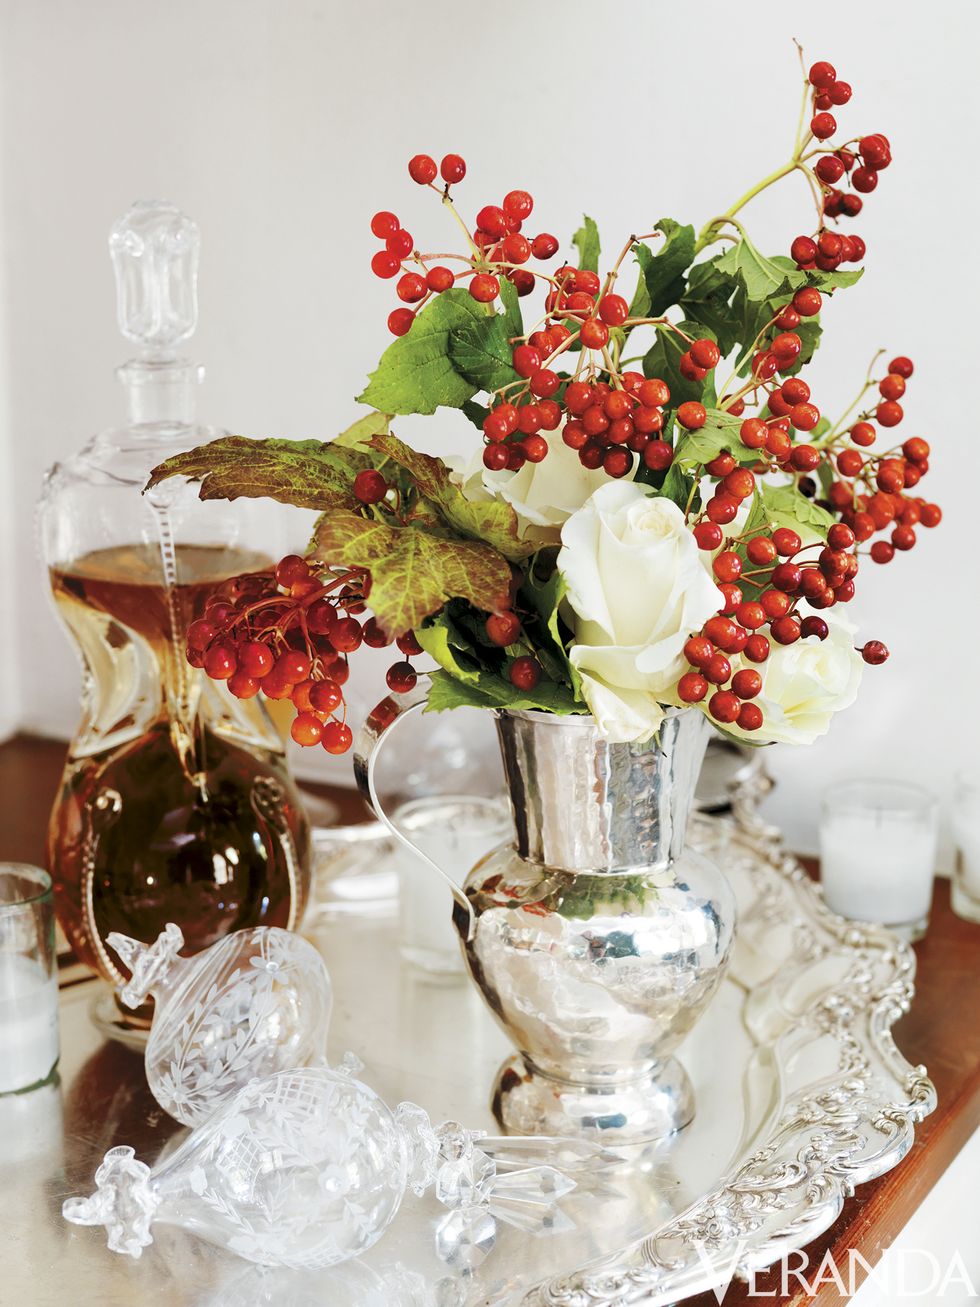 Christmas & Winter Floral collection